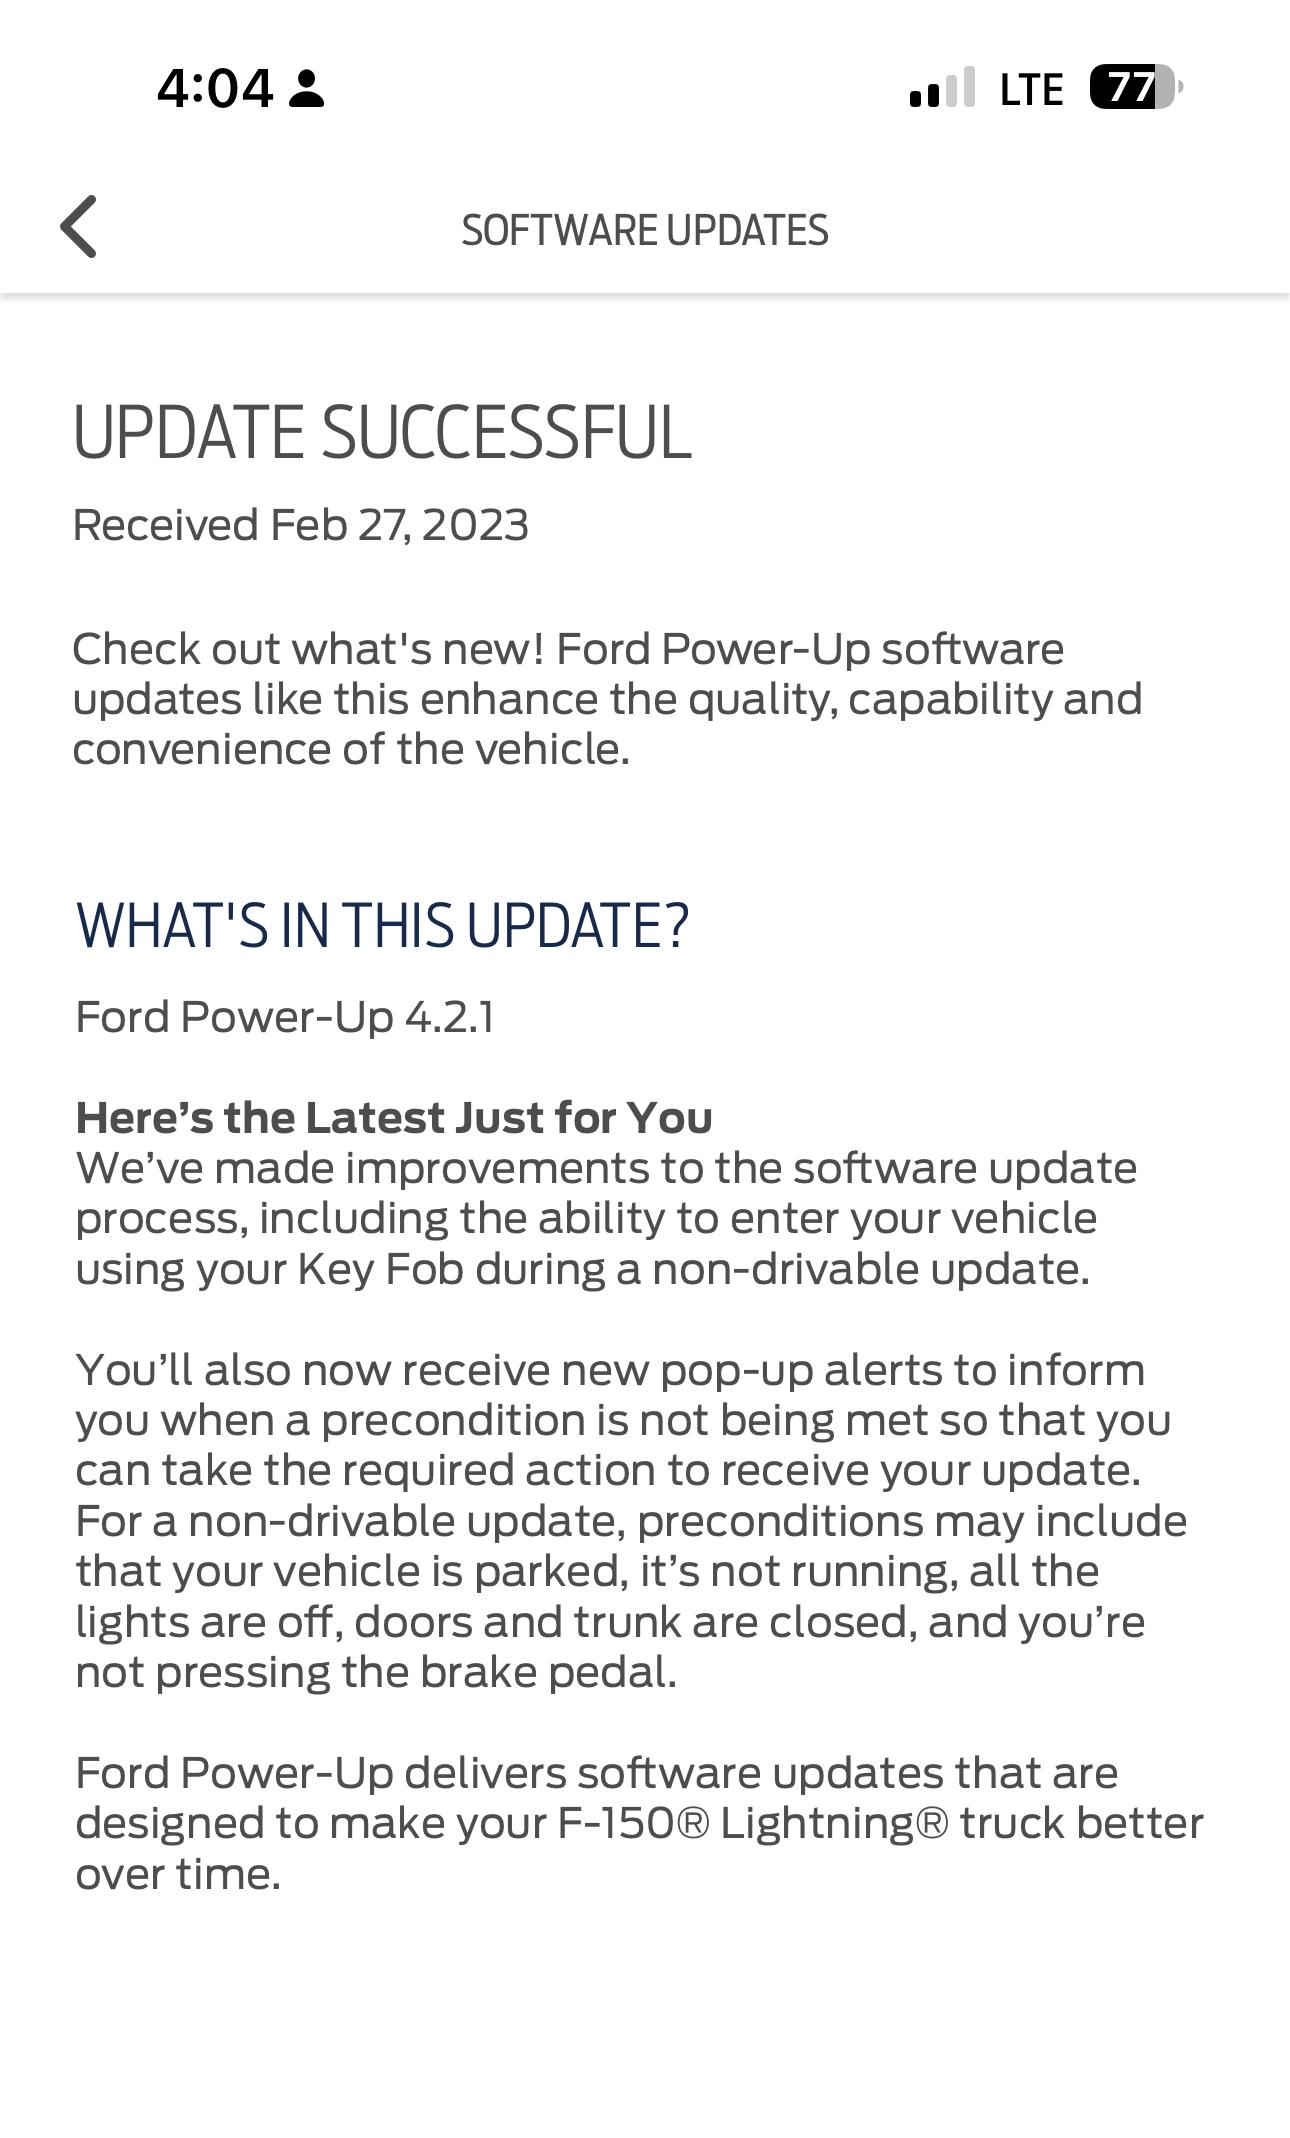 Ford F-150 Lightning Power-Up 4.2.1 - Precondition Alert failed updates IMG_4619